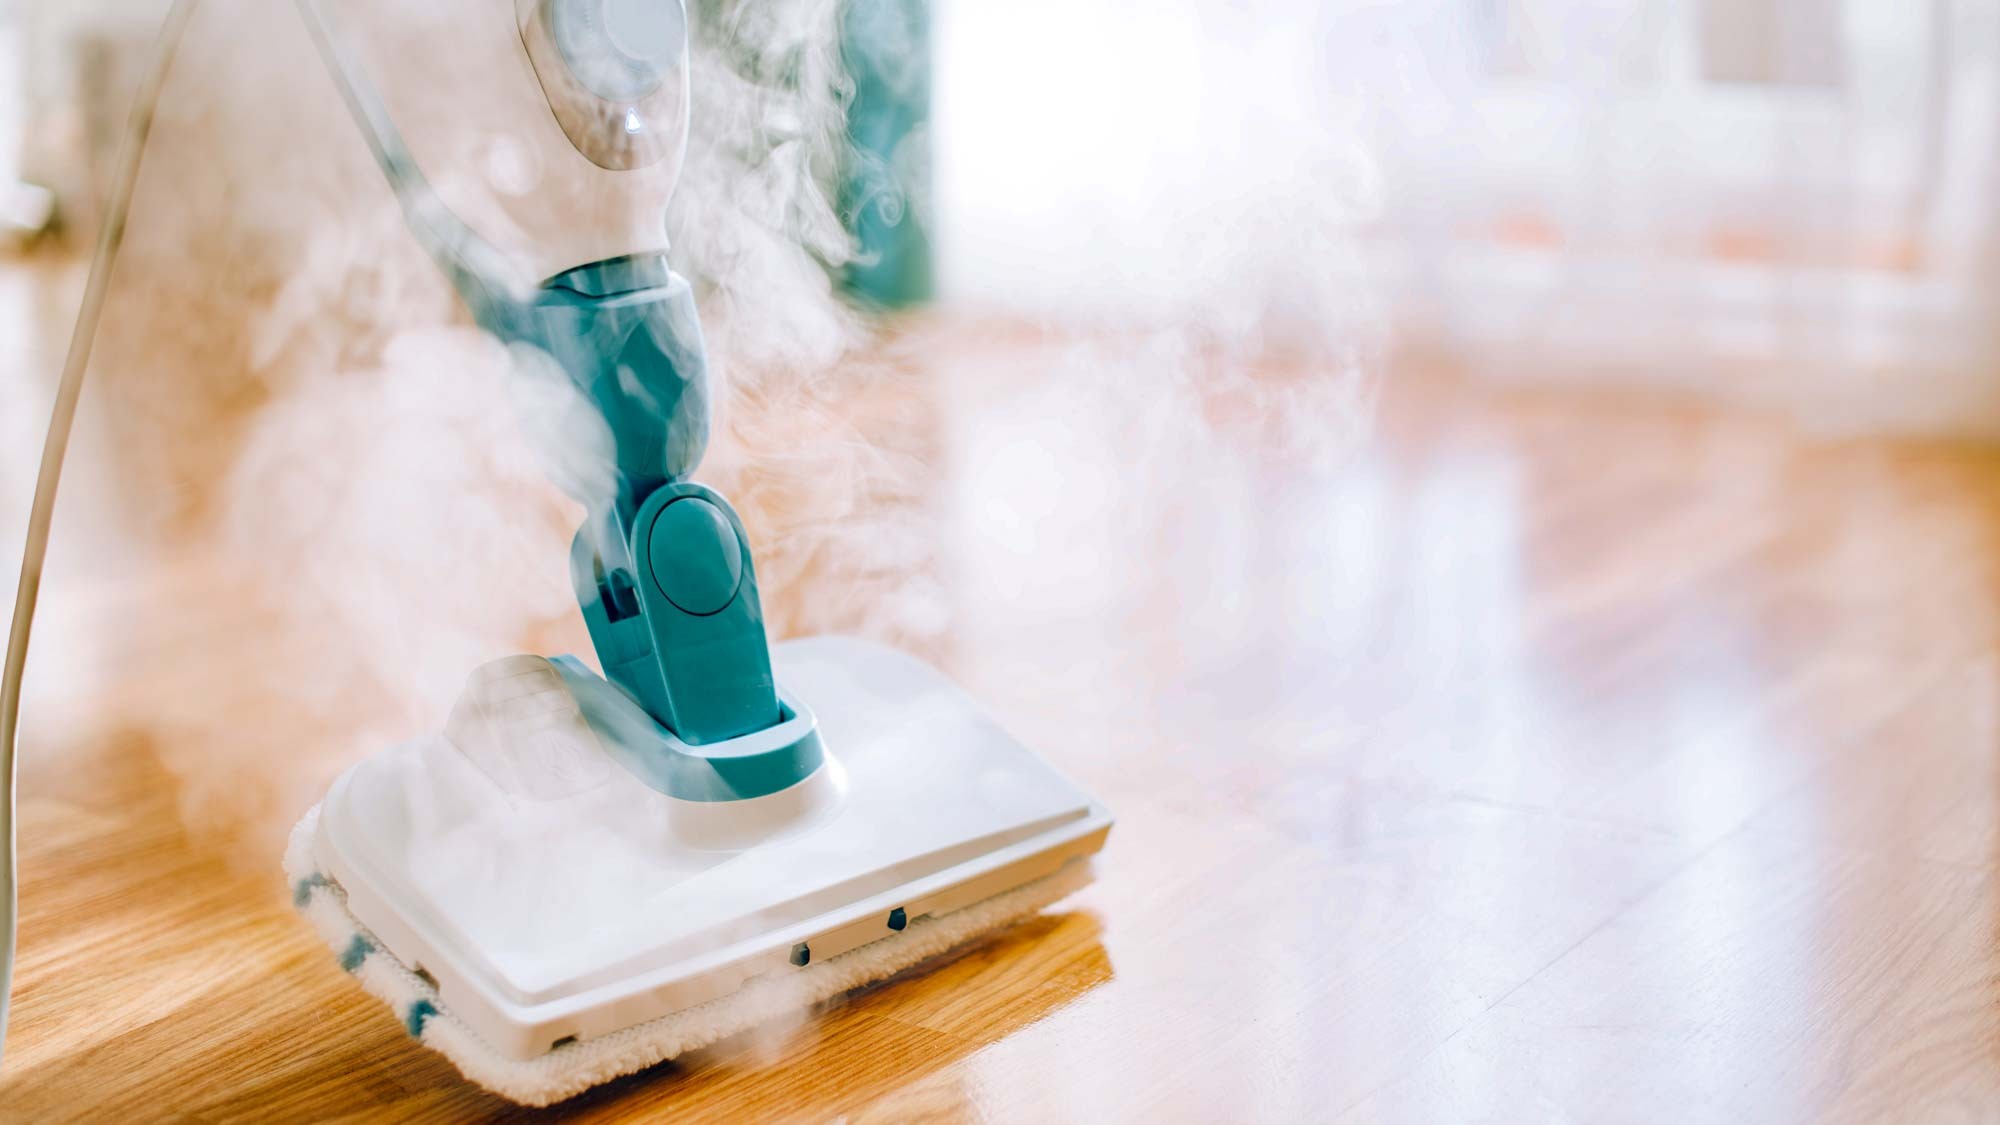 Boiling water and steam mops can cause 'serious damage' for wood